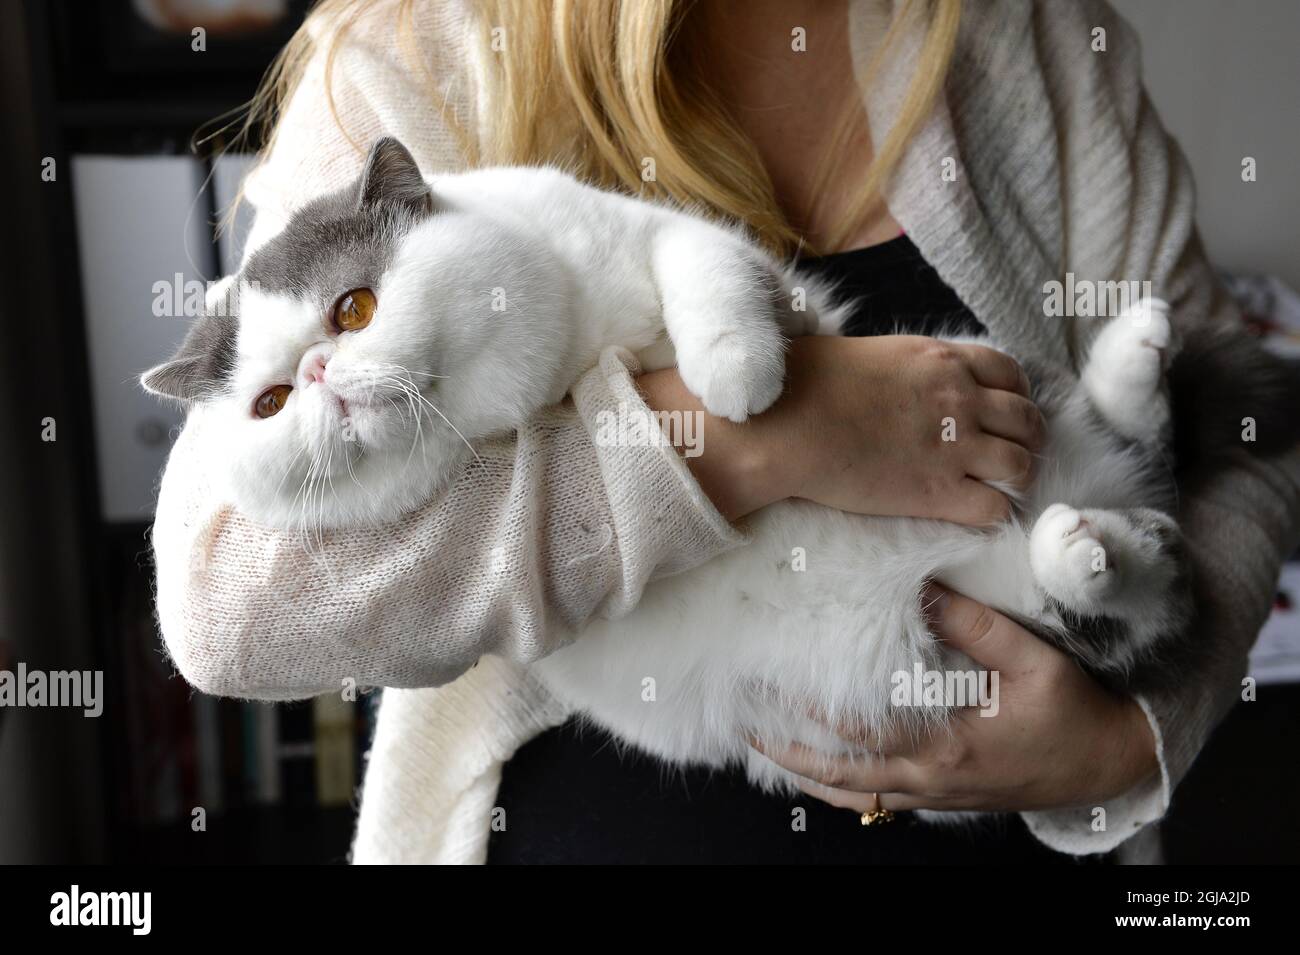 STOCKHOLM 2016-04-04 Cat of the rase Exotic. Foto: Anders Wiklund / TT / Kod 10040 domesticated animals, breeding, pets, fur, allergic reaction  Stock Photo